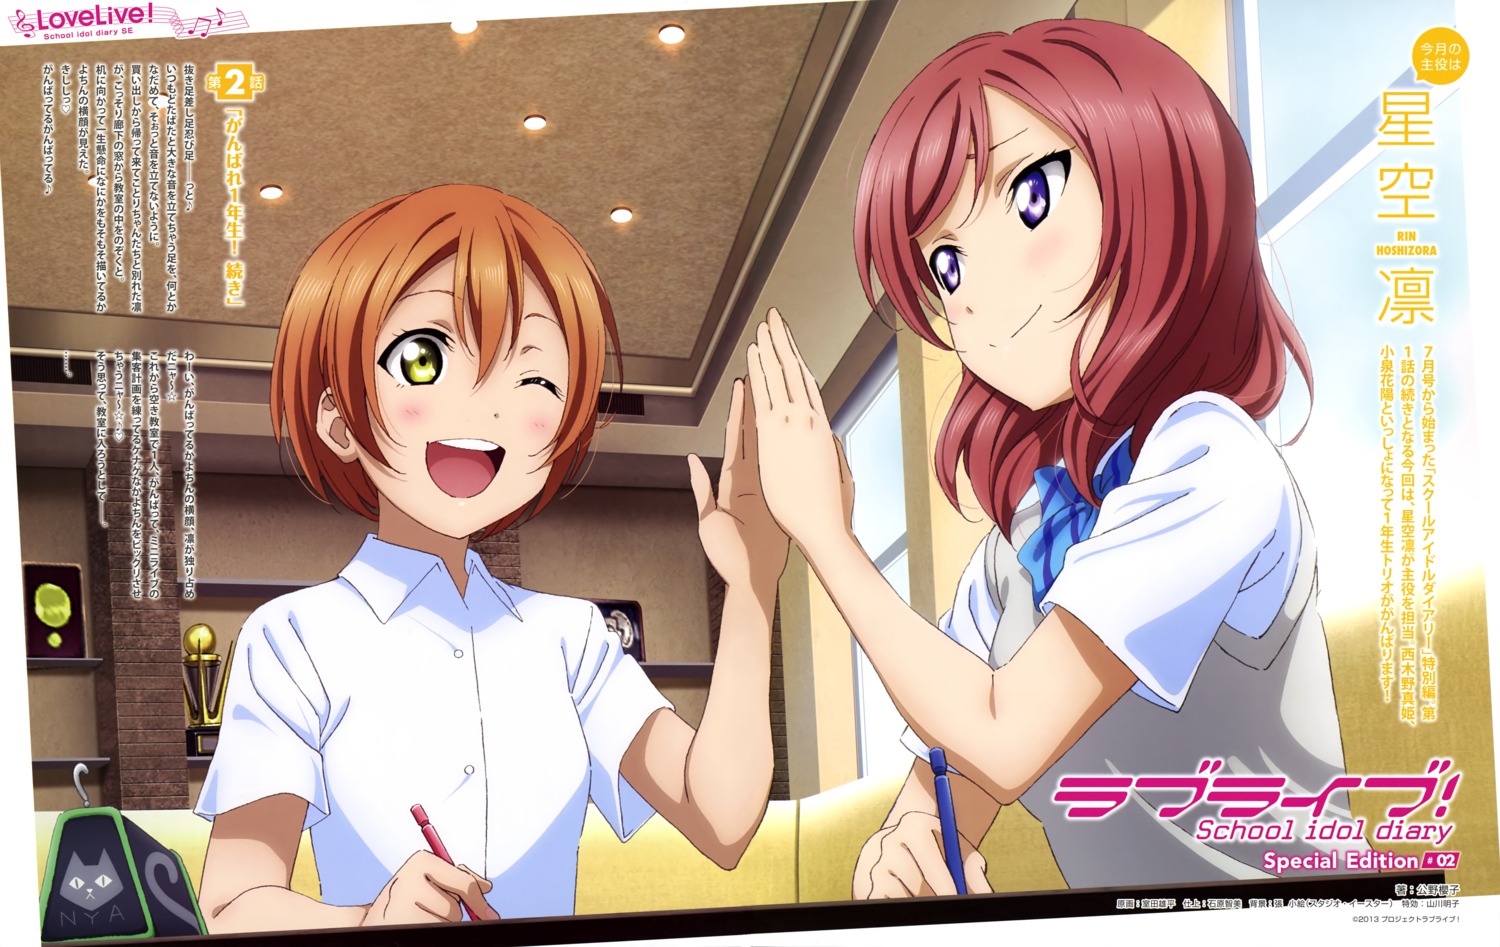 Love Live School Idol Diary Special Edition Yande Re